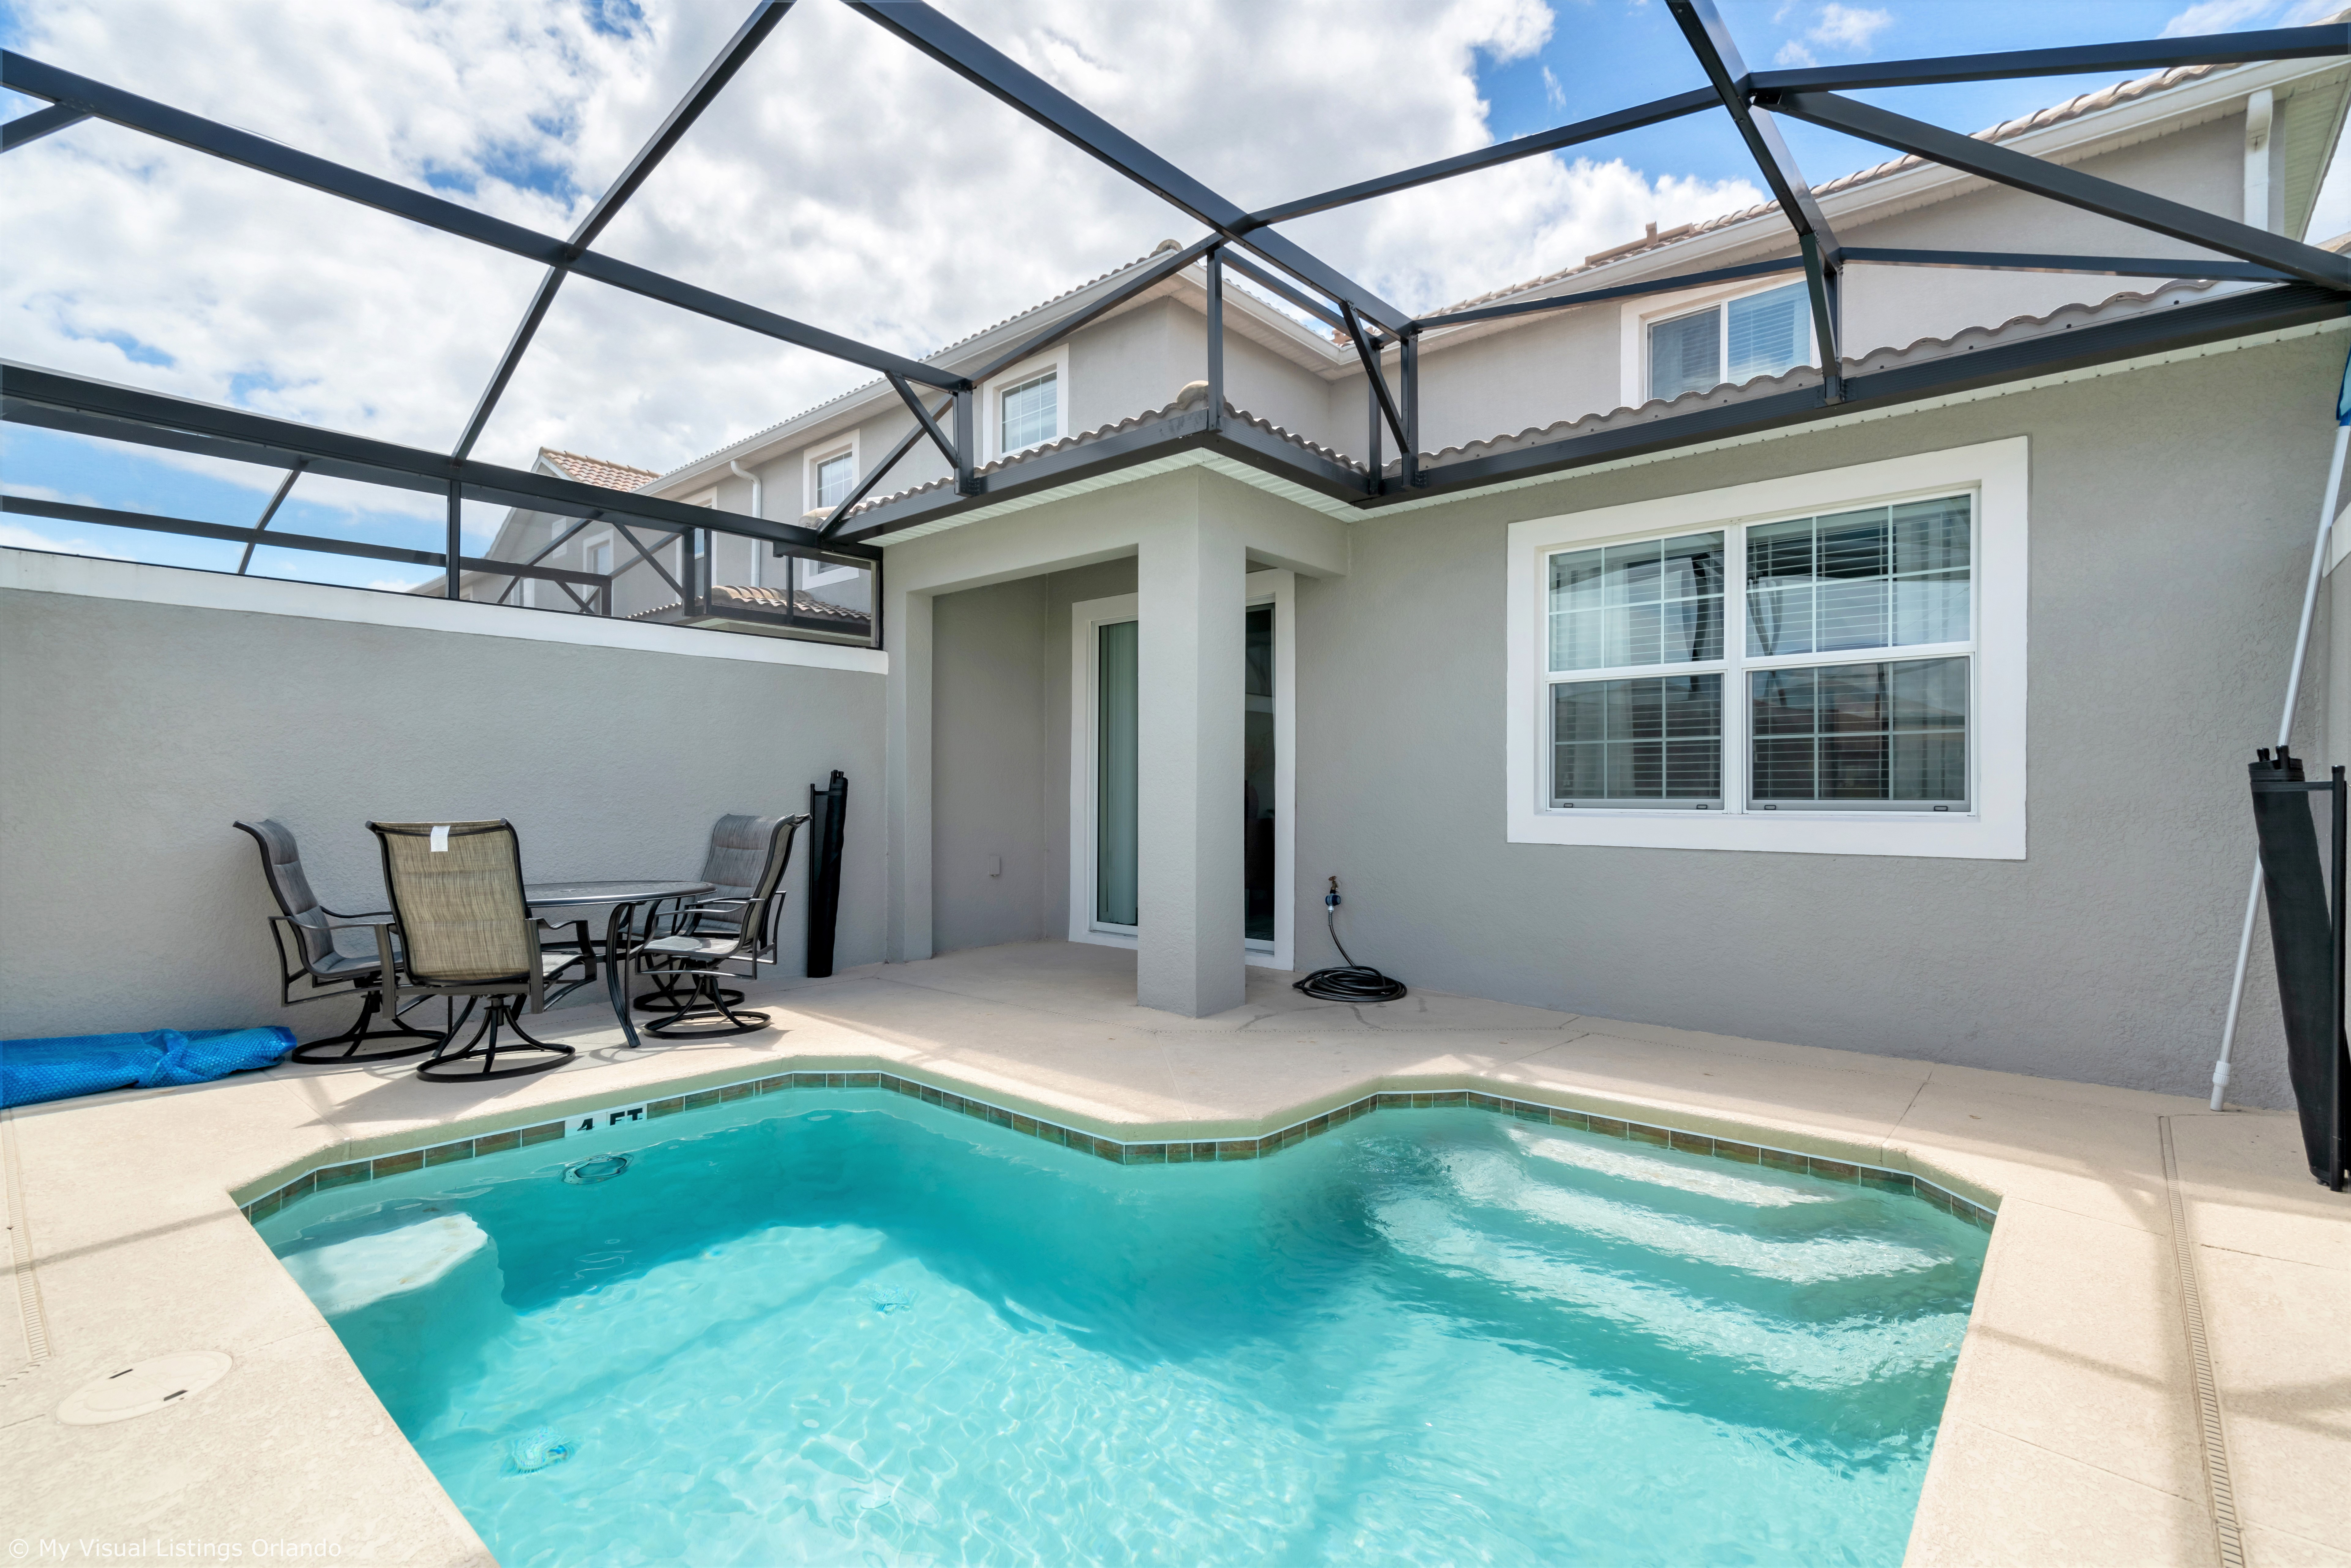 Immerse yourself with the private pool of this townhouse with outside dining area